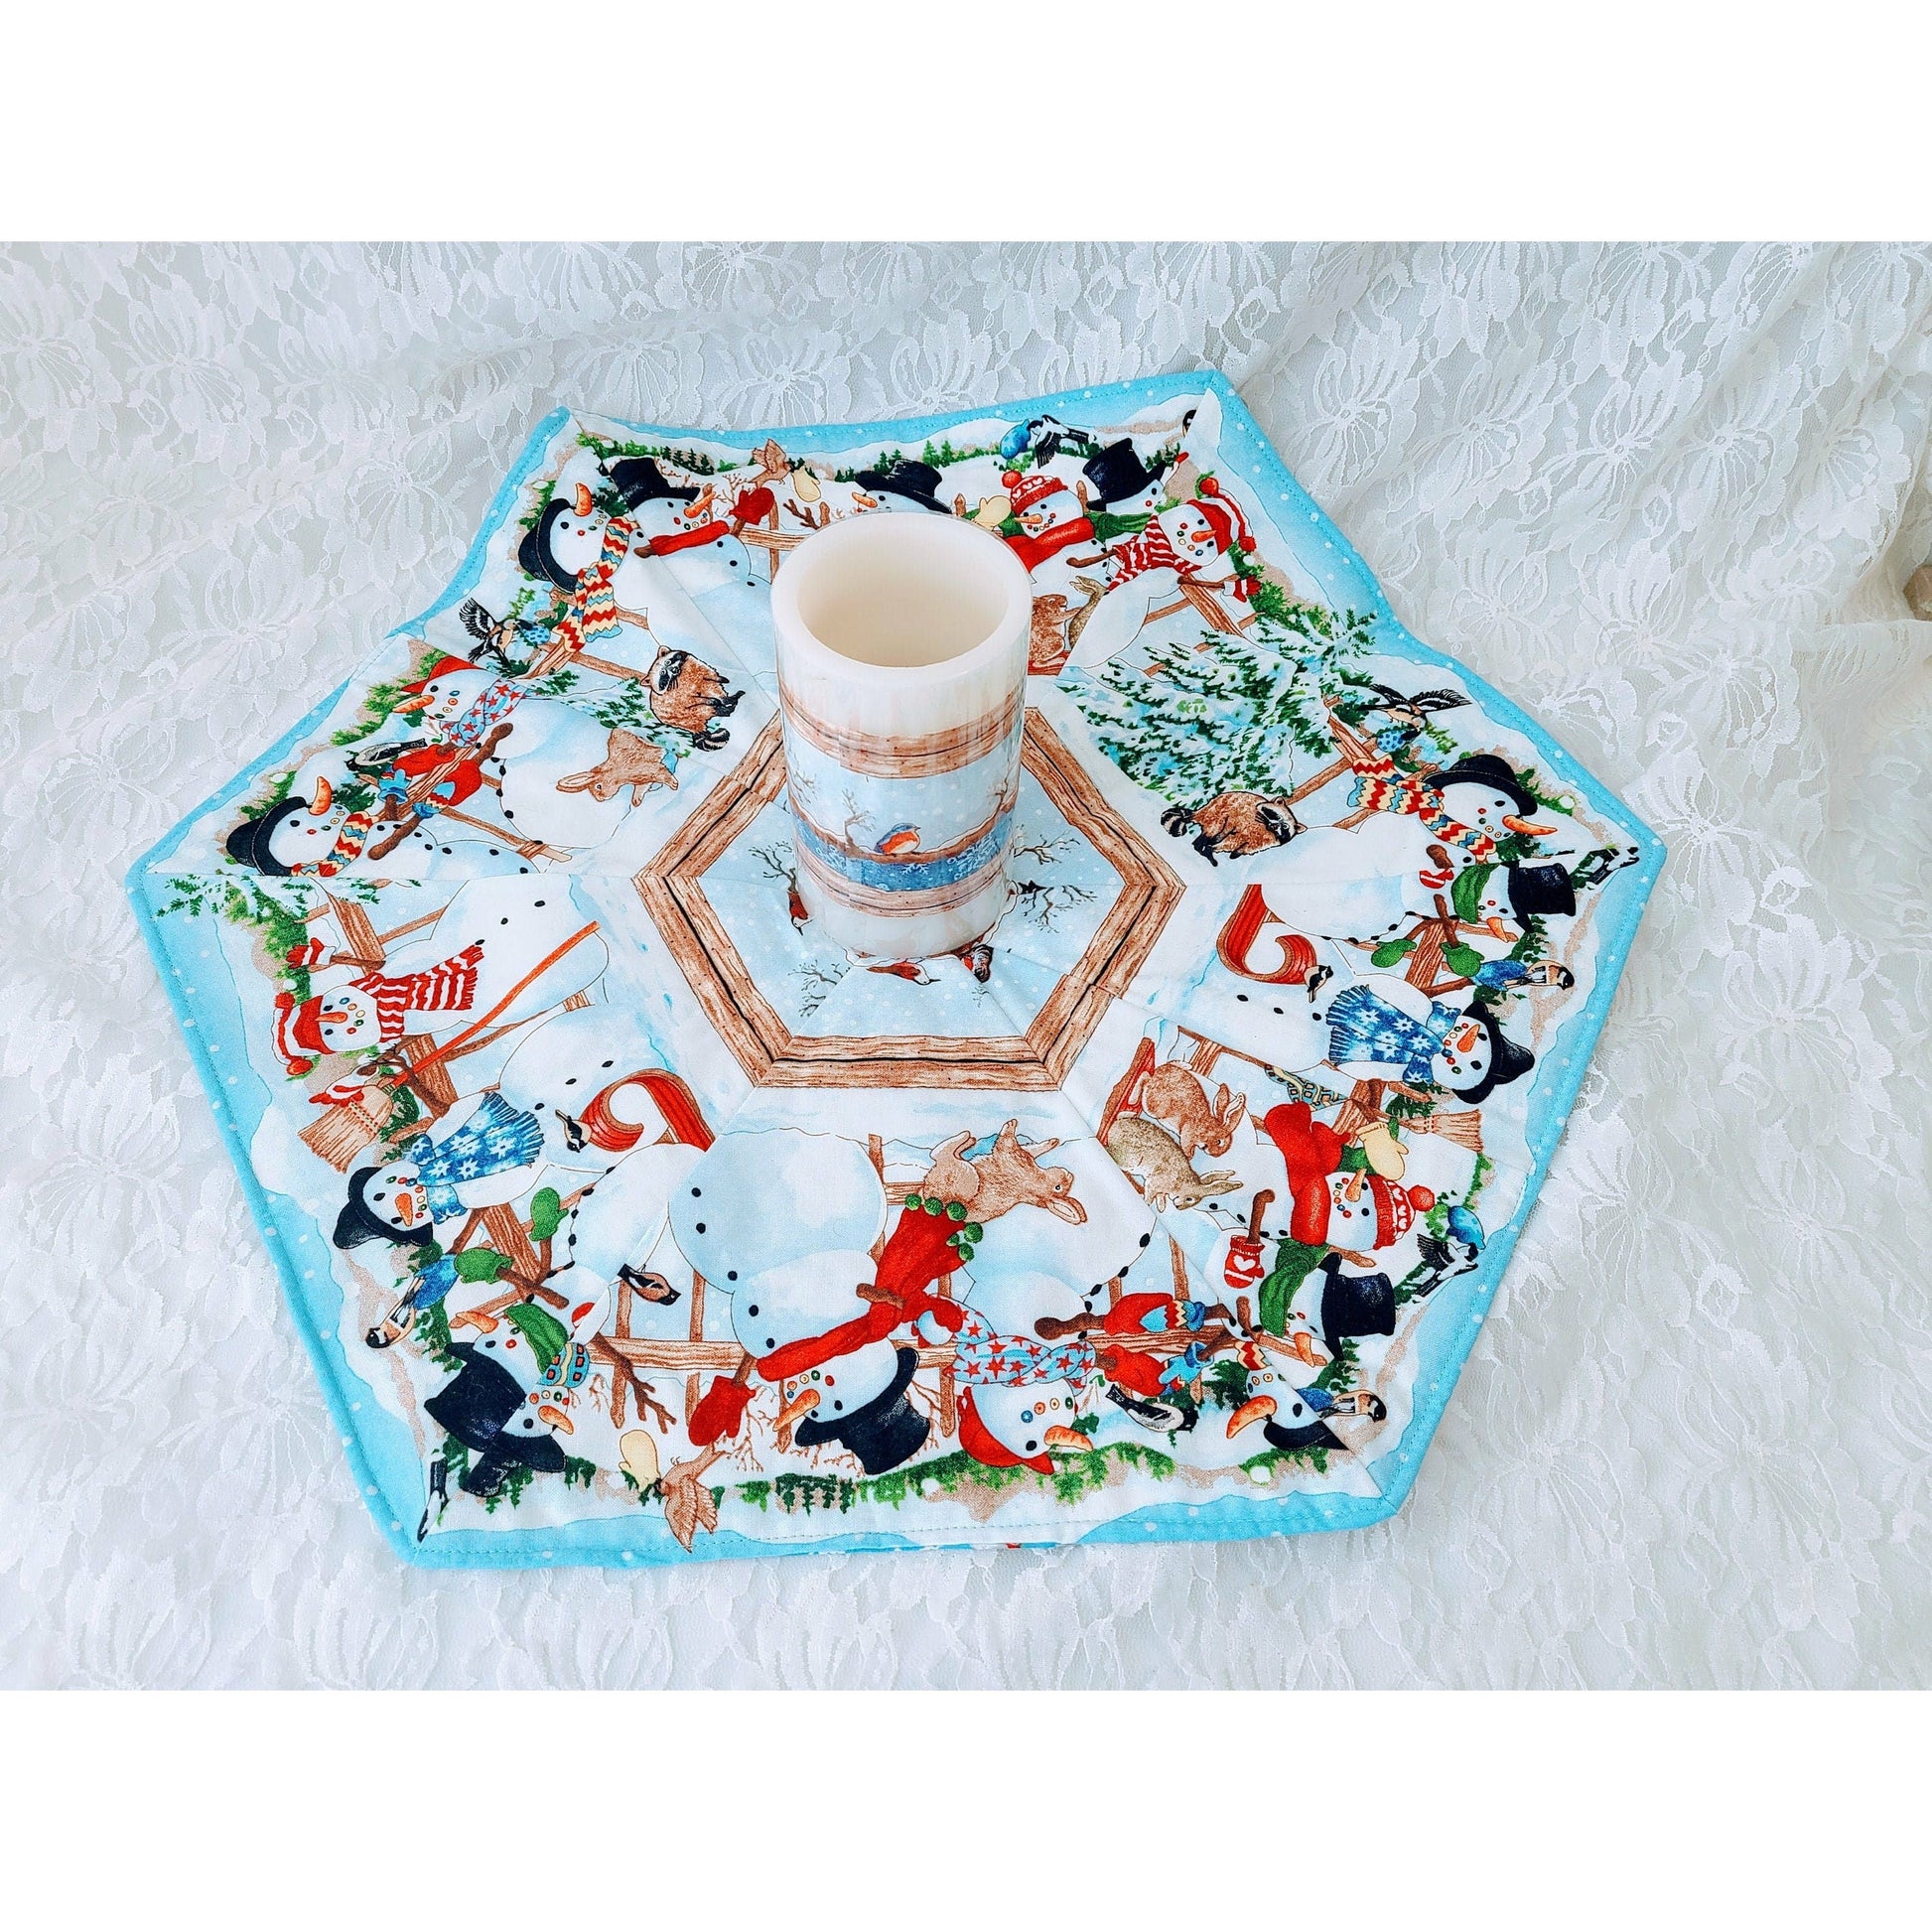 Handmade Christmas Table Runner ~Large 20" Accent Runner w/ Matching Battery Candle ~ Snowman Blue Cute ~ Unique! ~OOAK Holiday Décor